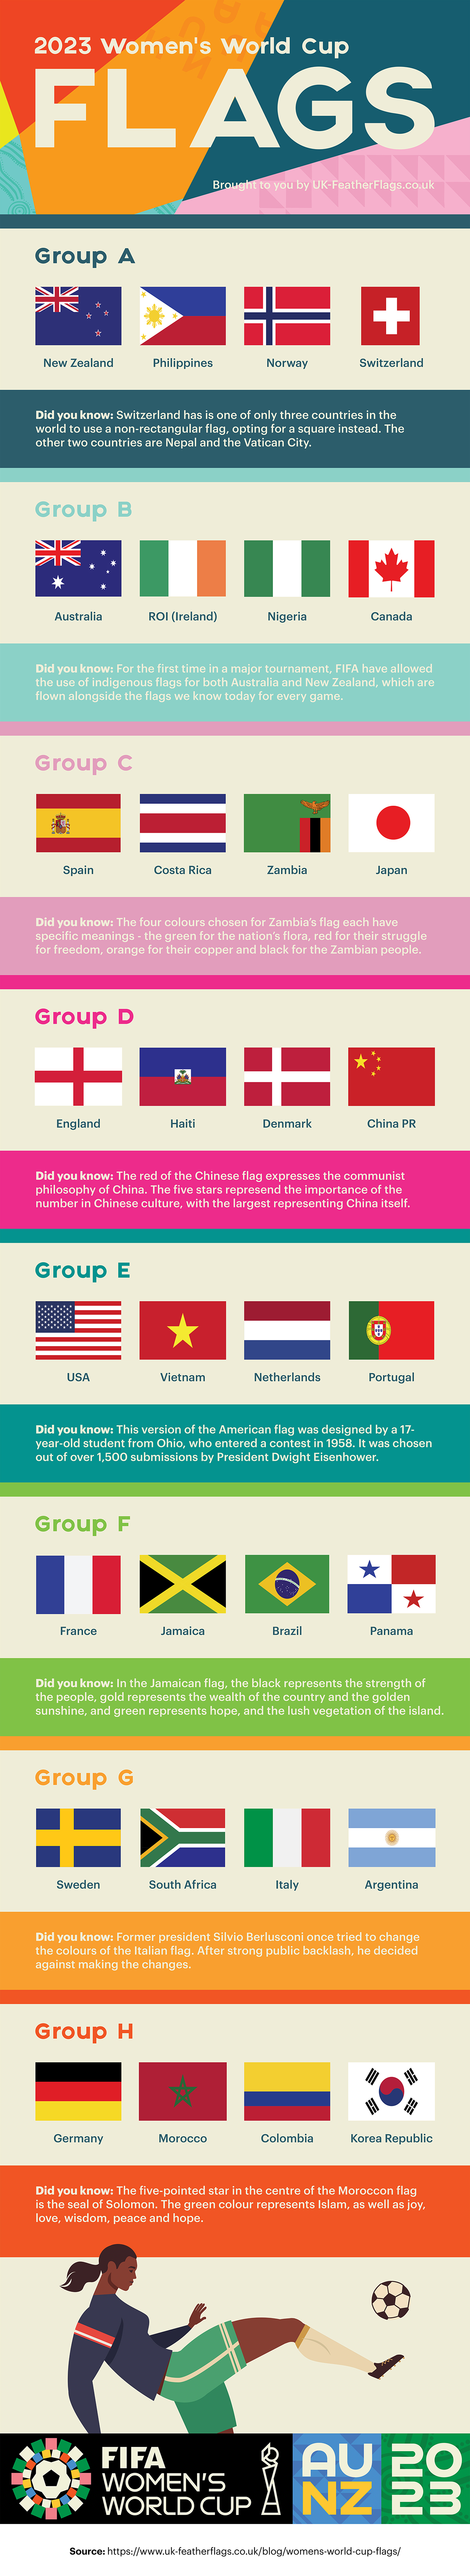 2023 Women's World Cup Flags - Infographic